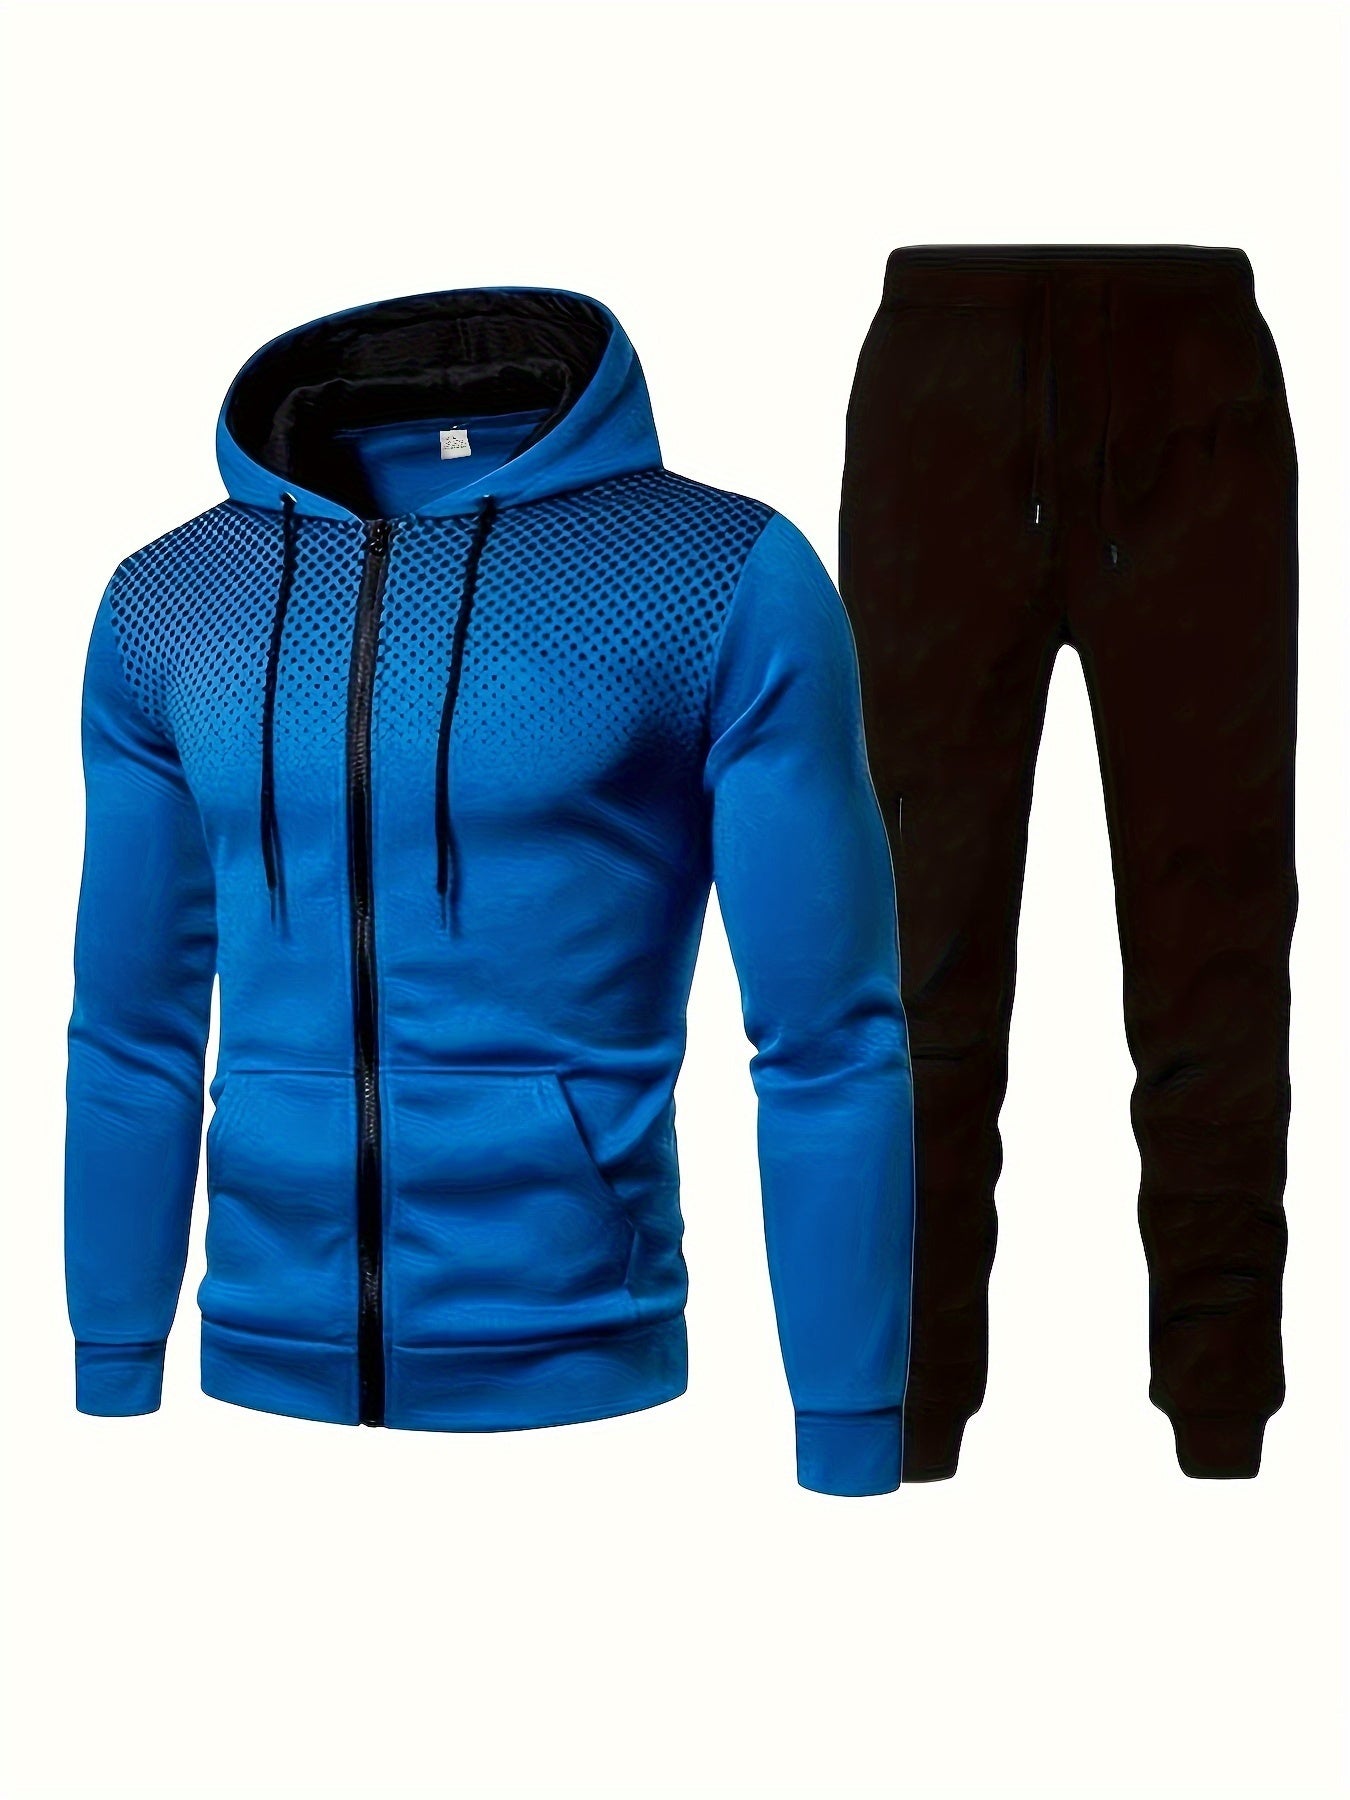 Casual Two Piece Set, Men's Graphic Zip Up Hooded Athletic Jacket & Drawstring Joggers Matching Set For Spring Fall Fitness Outdoor Activities